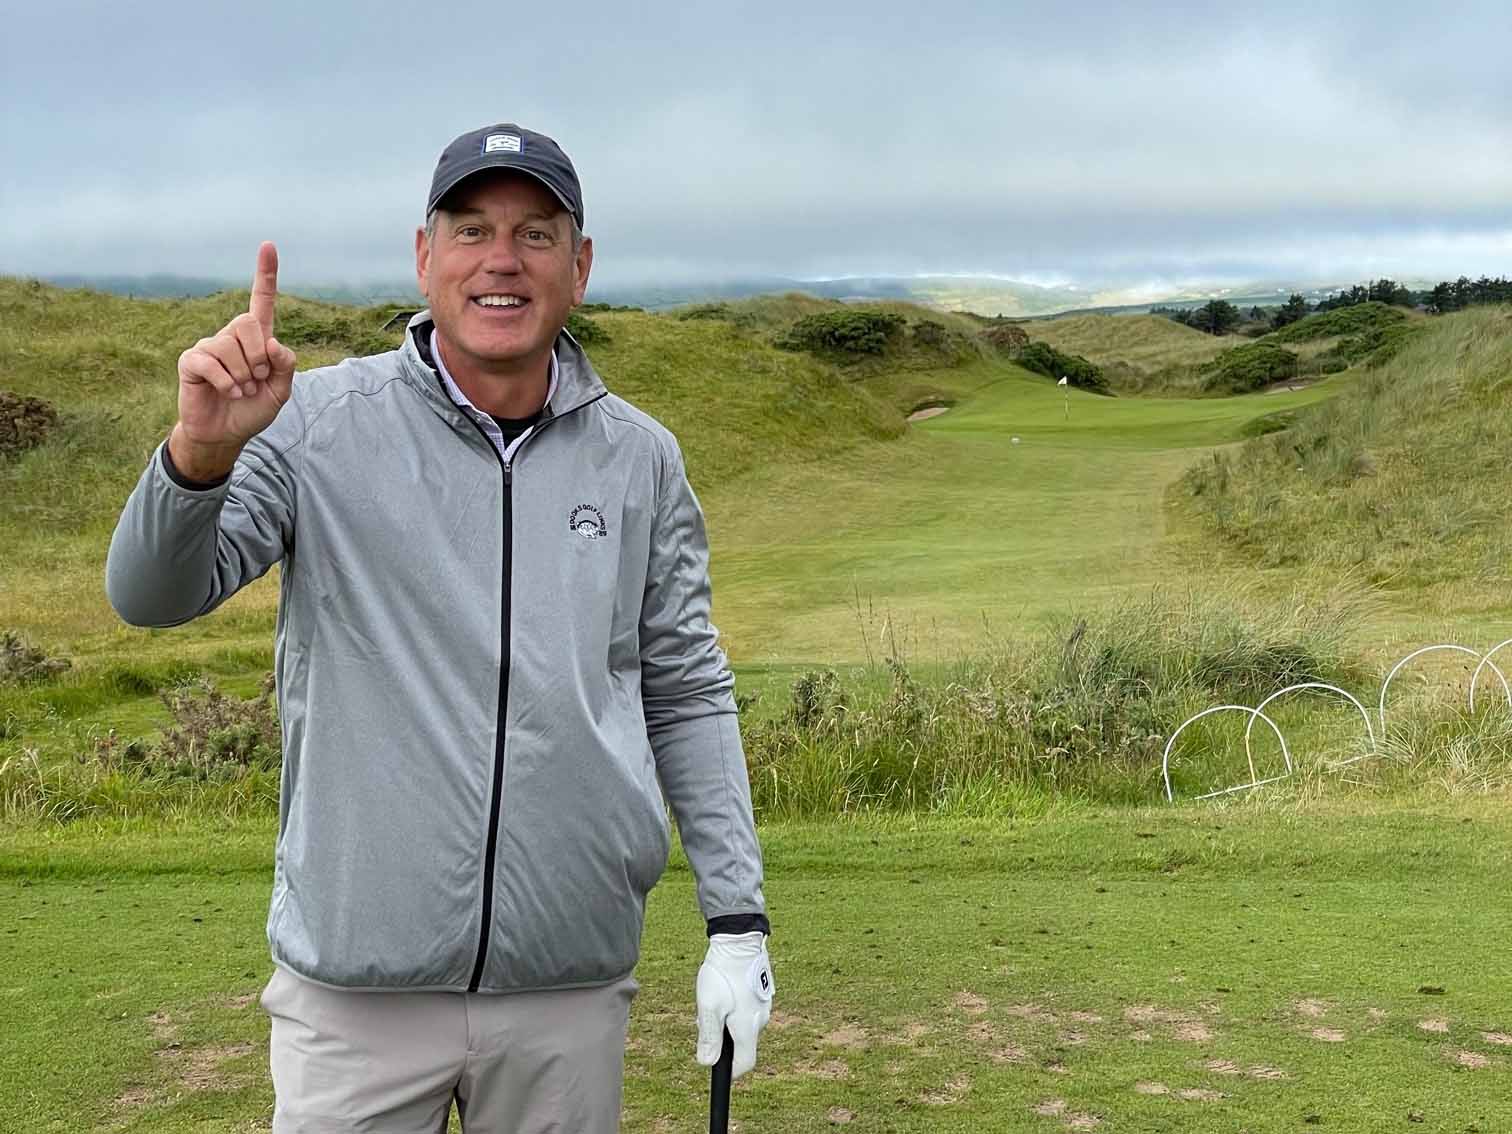 Golfer celebrates hole in one at Waterville Links